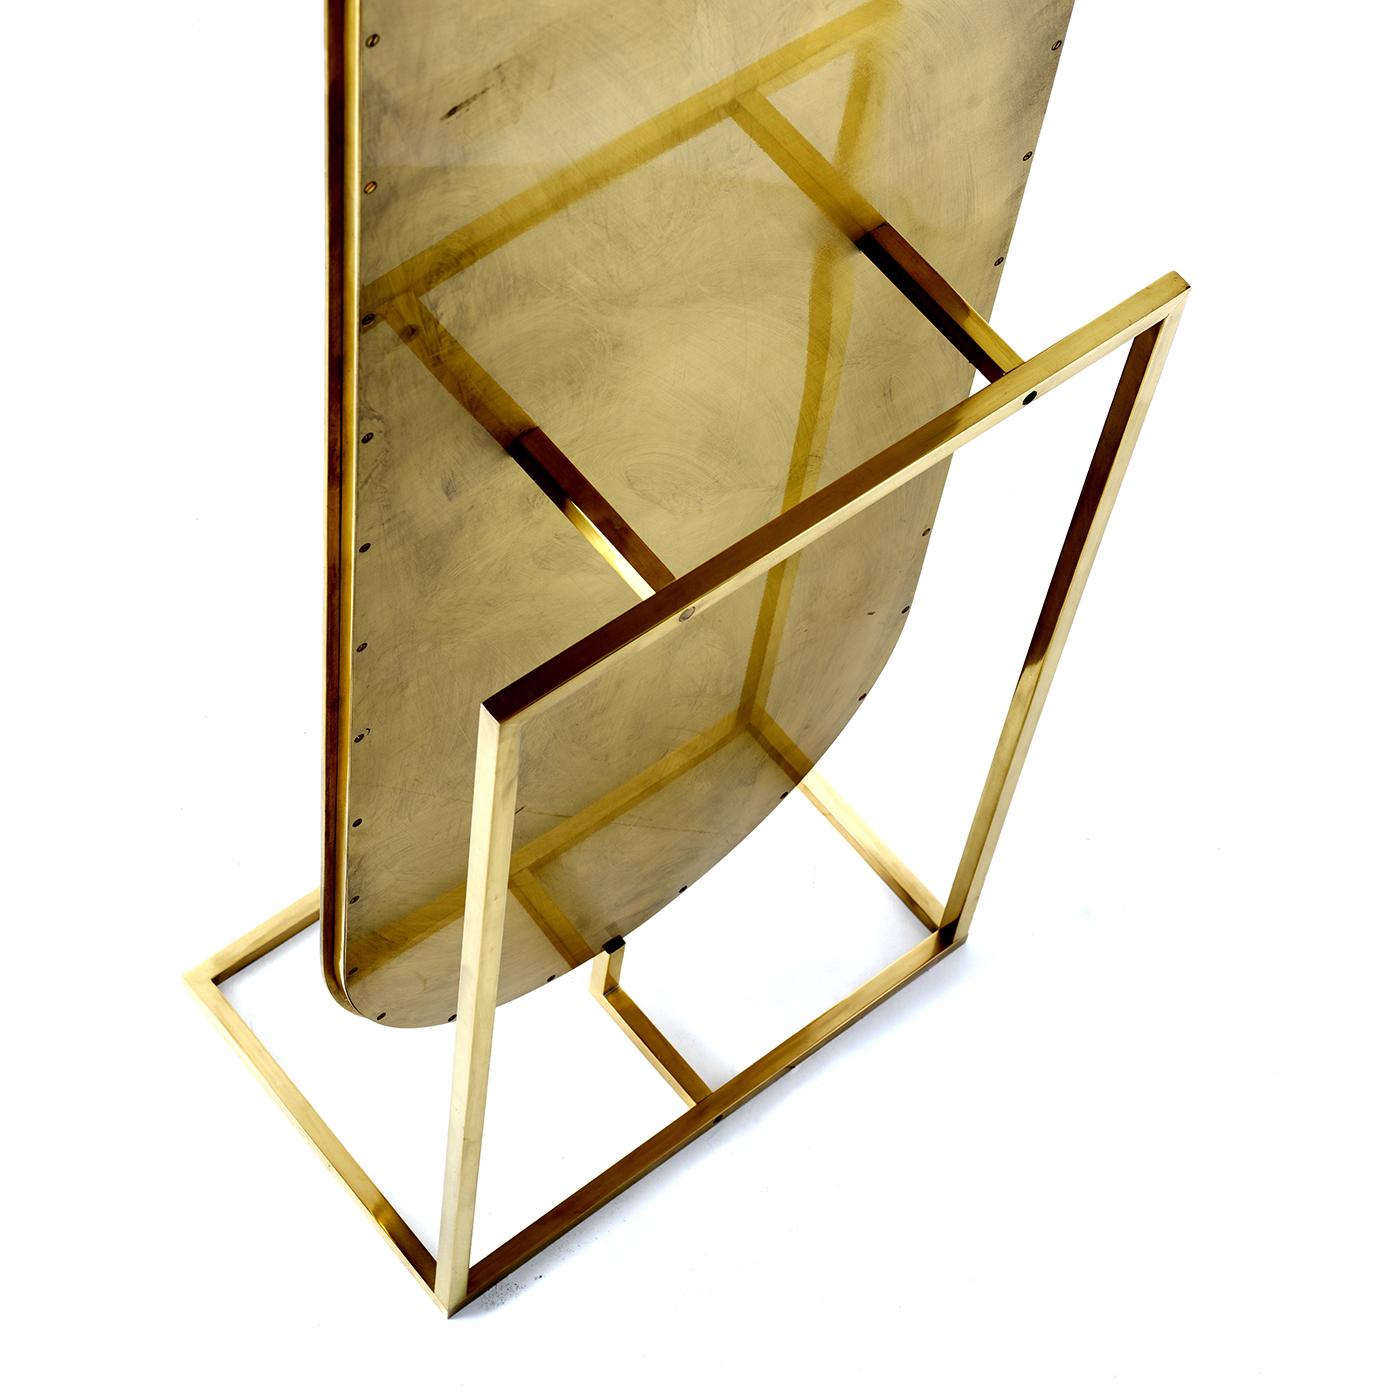 This fancy piece identified by its minimalistic and essential design is perfect to put in any room that needs an elegant yet fashionable mirror. The surface is clear and is framed with a deluxe brass structure. A magnificent item that will satisfy